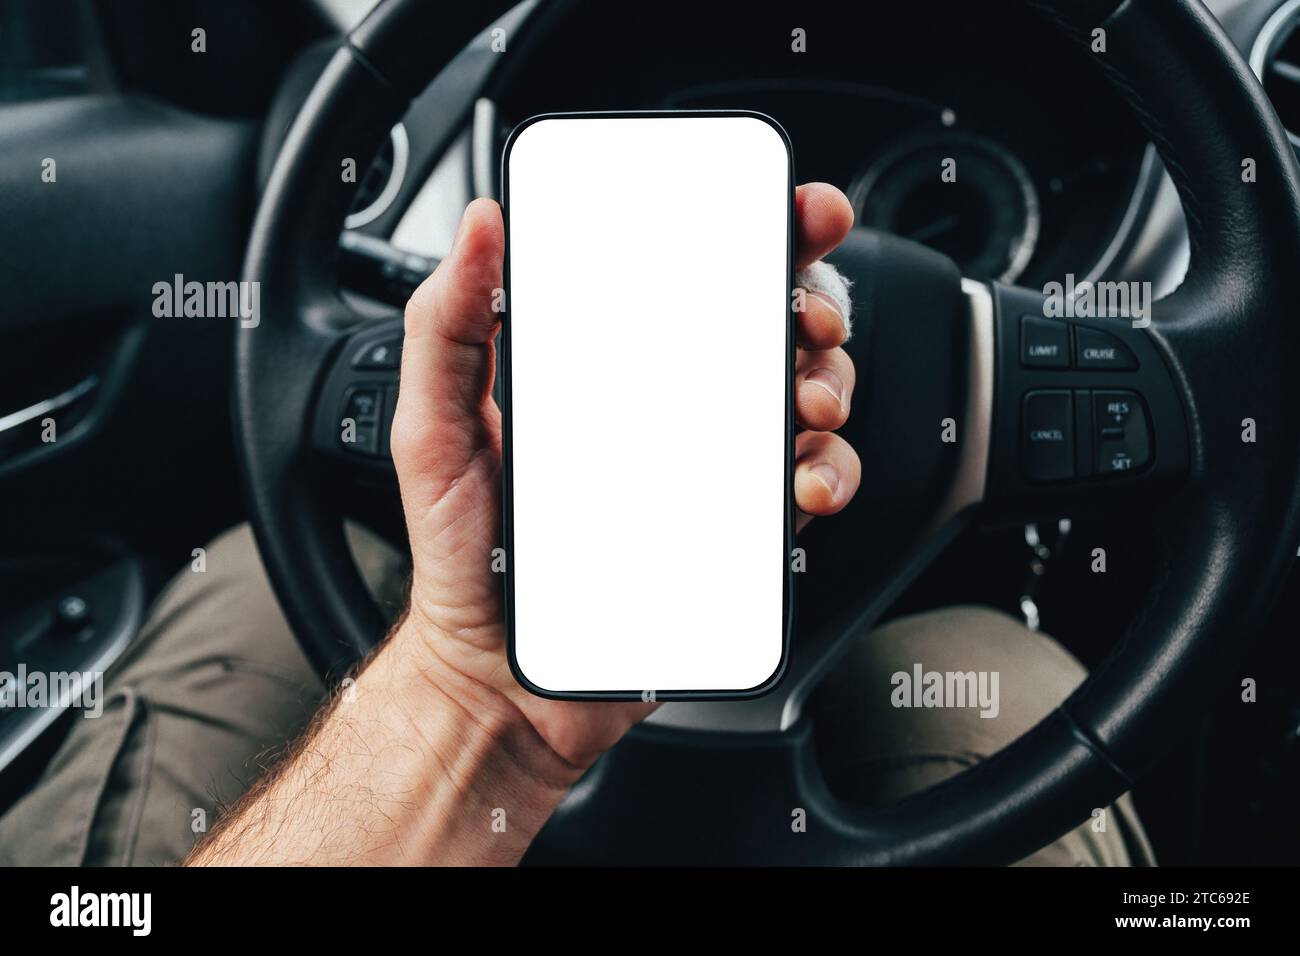 Driver app mockup with blank smartphone screen over steering wheel, man holding mobile phone device in car, selective focus Stock Photo